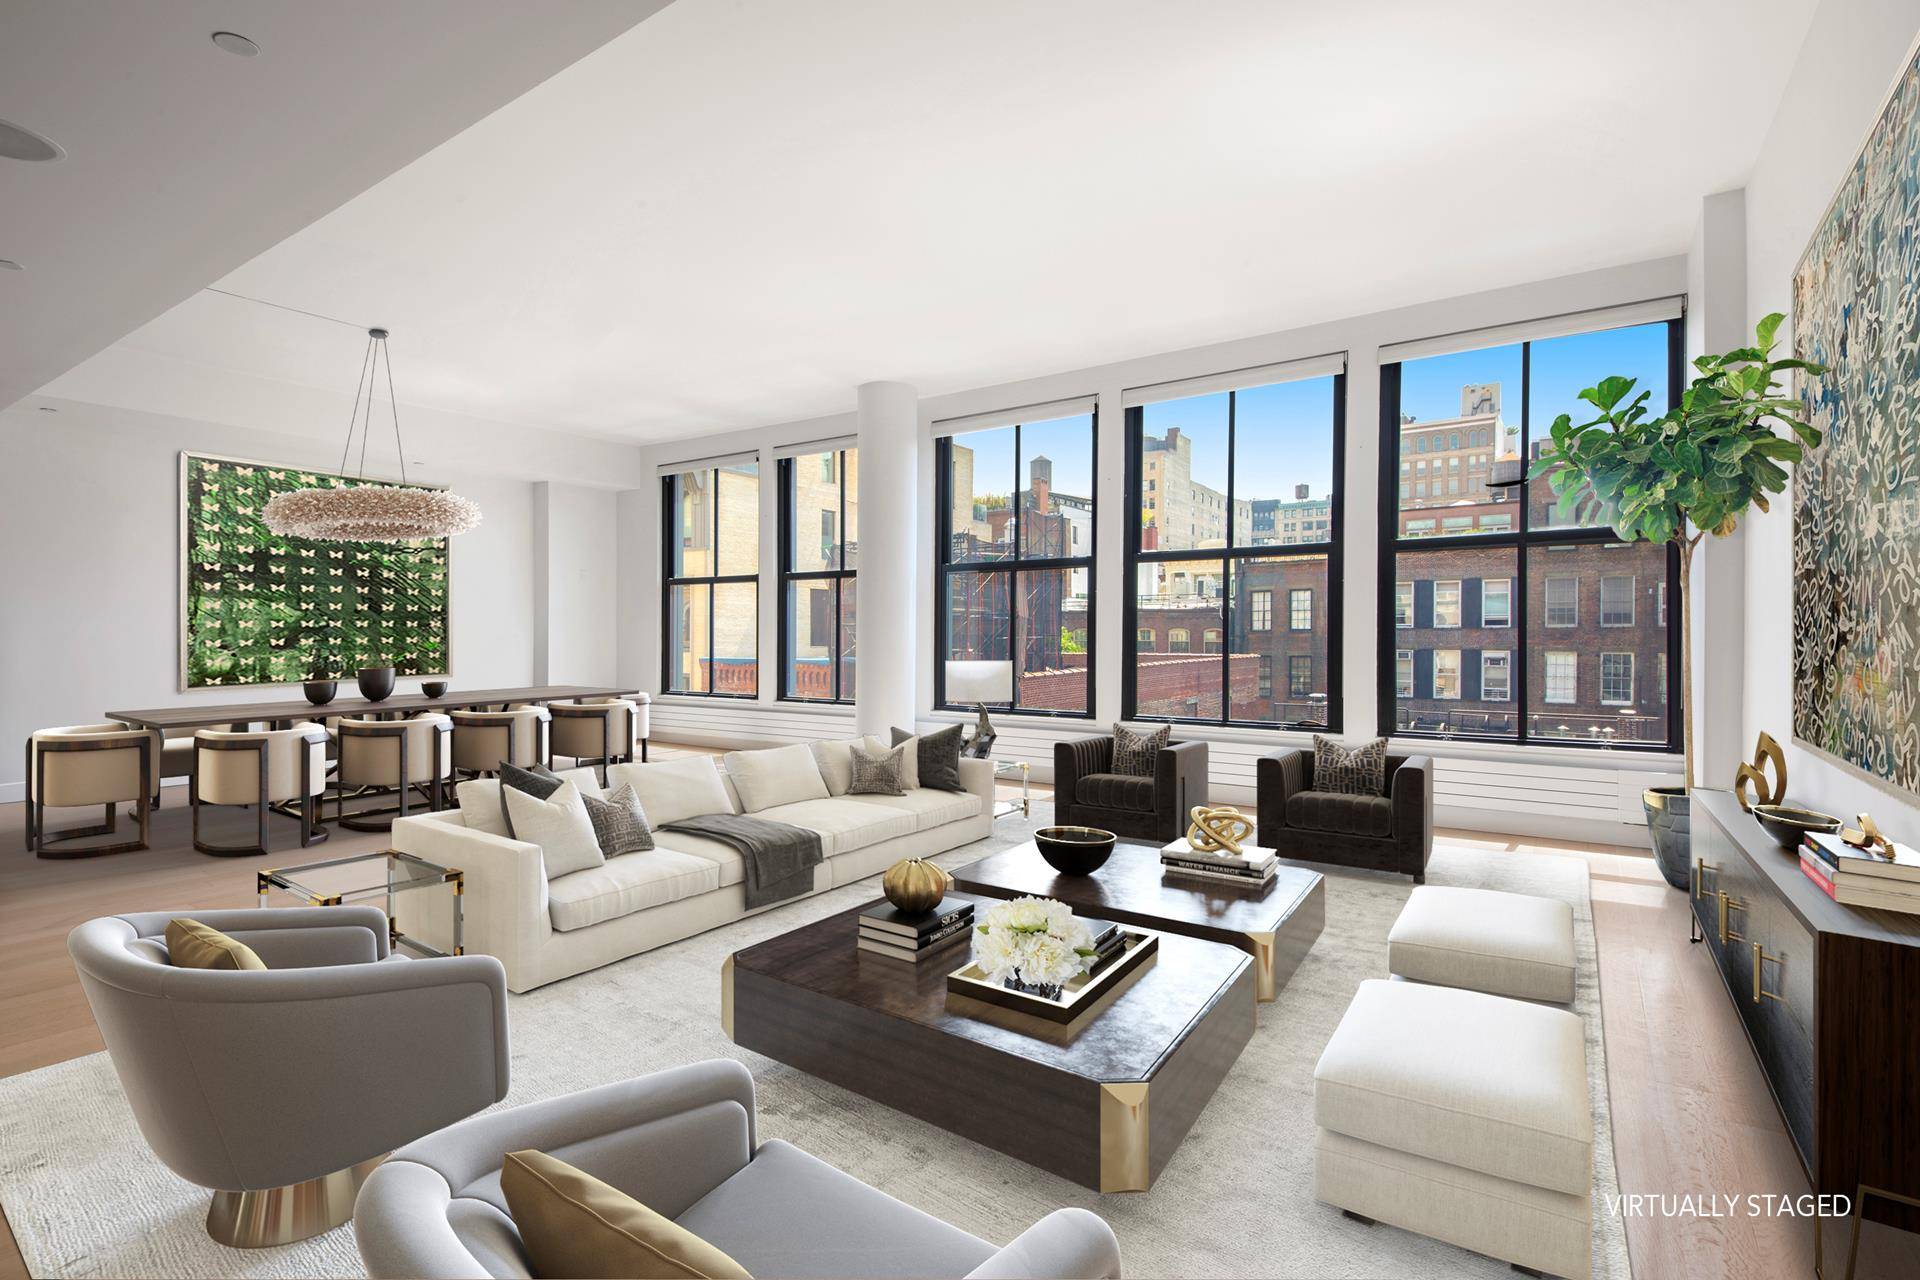 PH1A at 139 Wooster is a rare, 3, 000SF, full floor penthouse in the heart of the SoHo Cast Iron District.